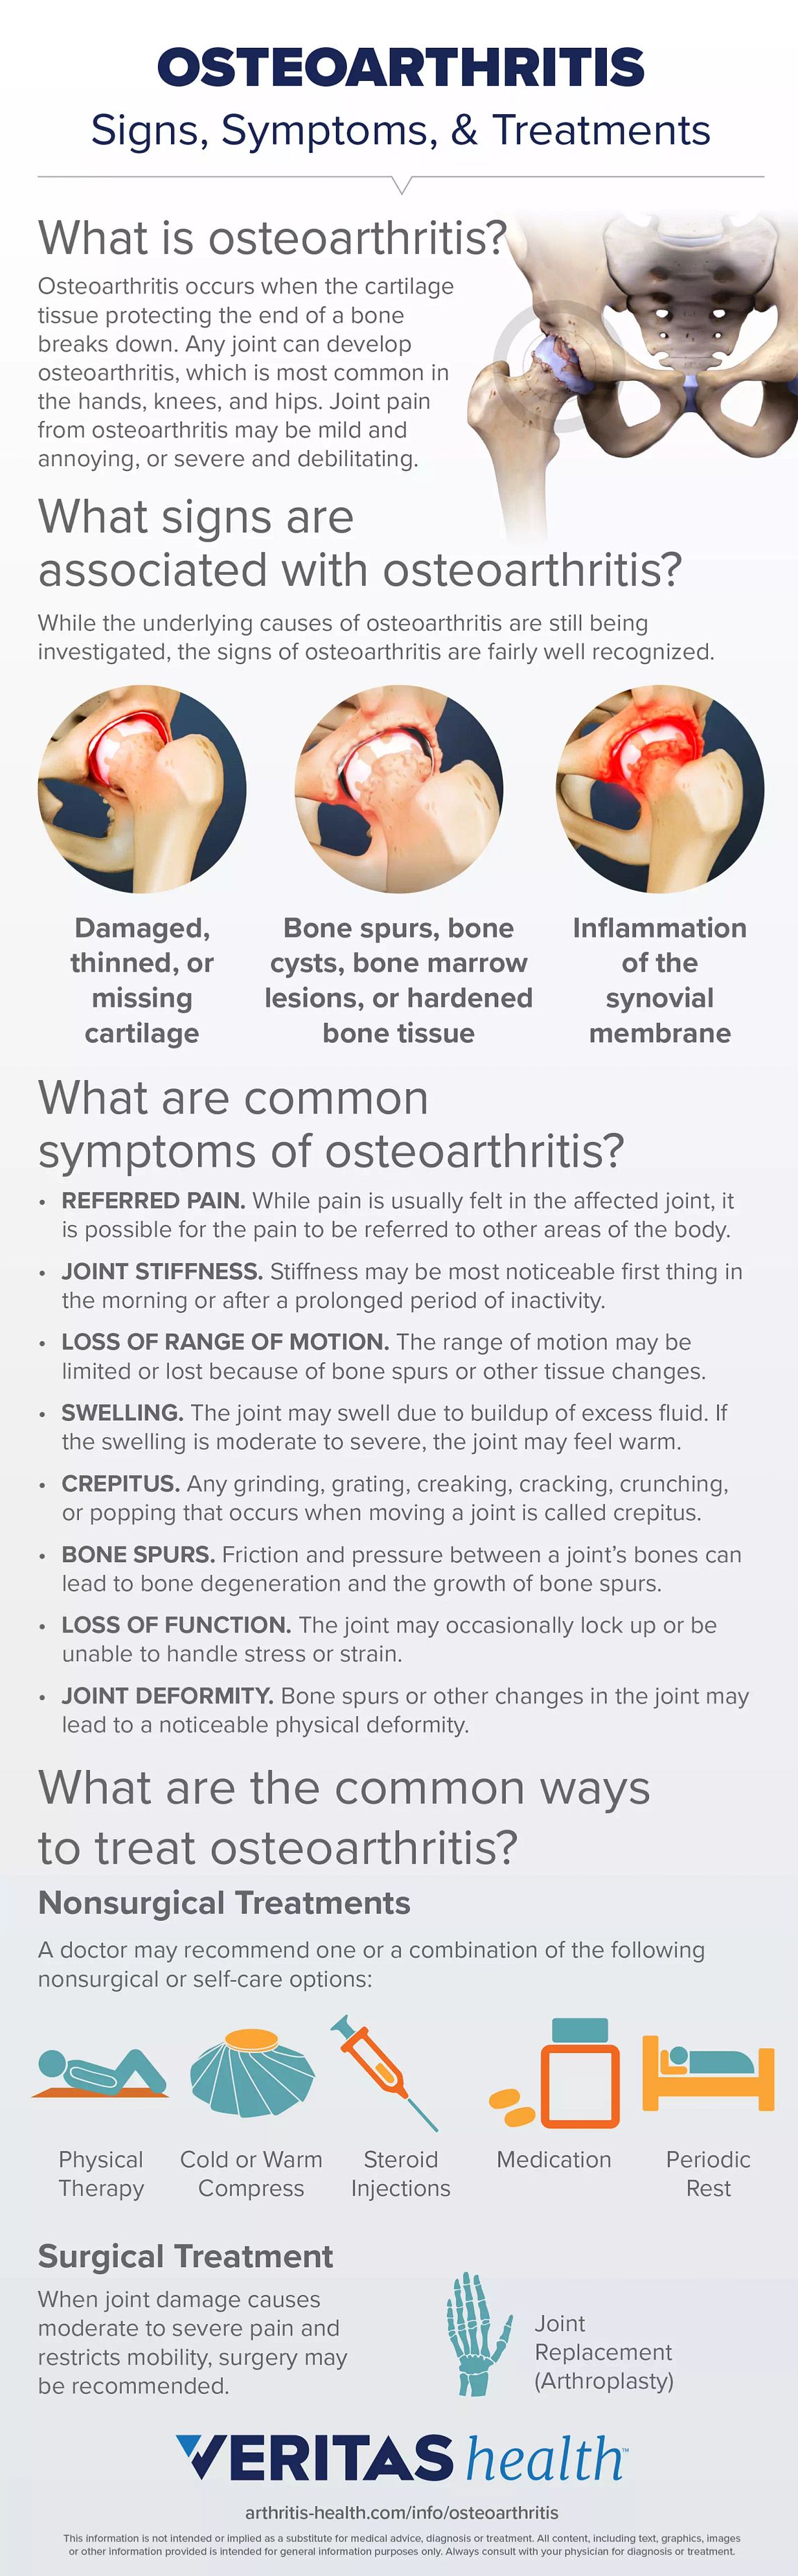 osteoarthritis symptoms and signs)